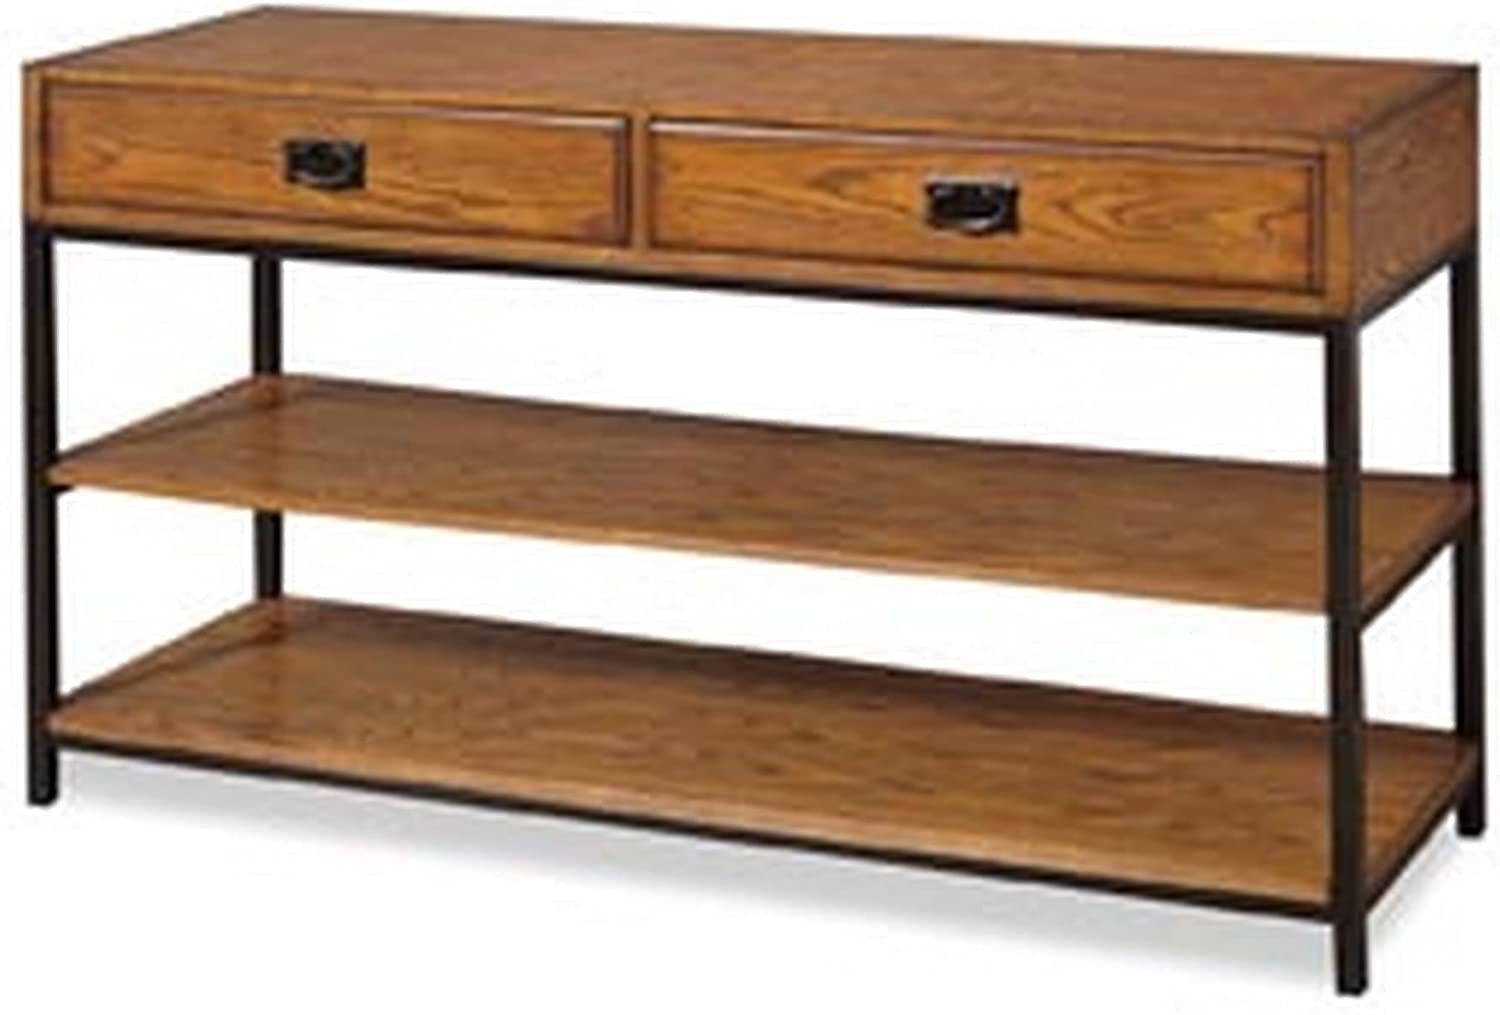 Media Console By Home Styles In Modern Craftsman Distressed Oak. - $342.96